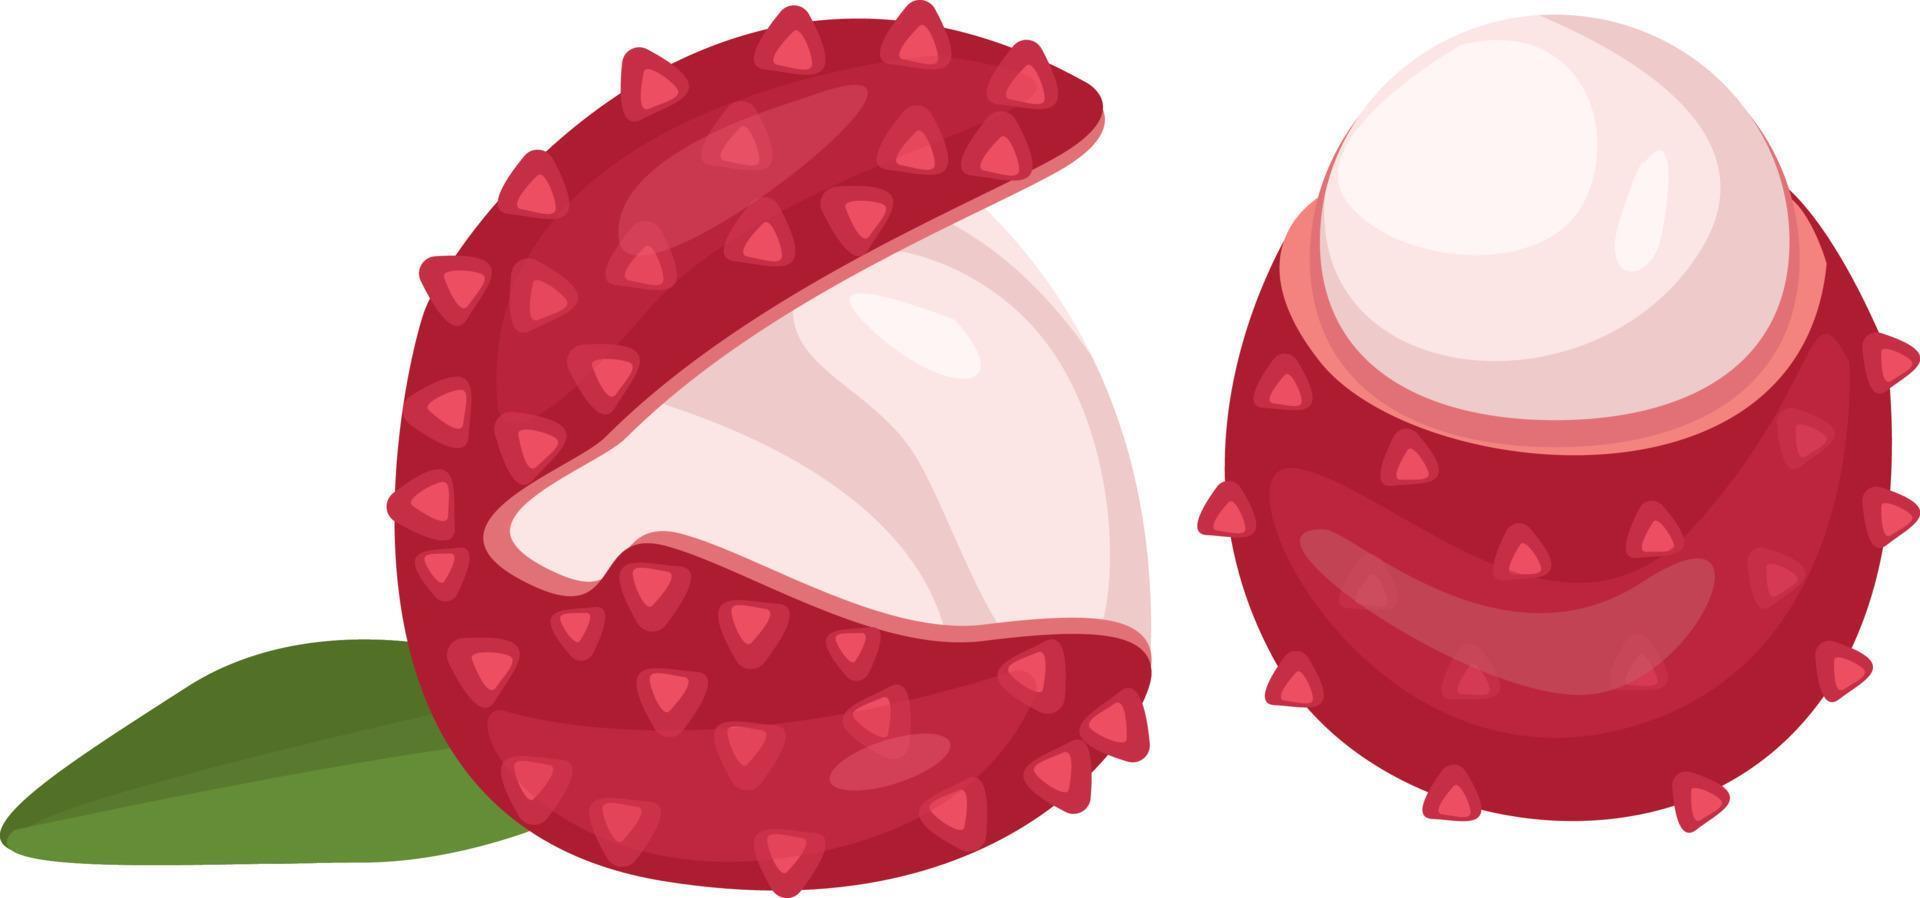 Red litchi, illustration, vector on white background